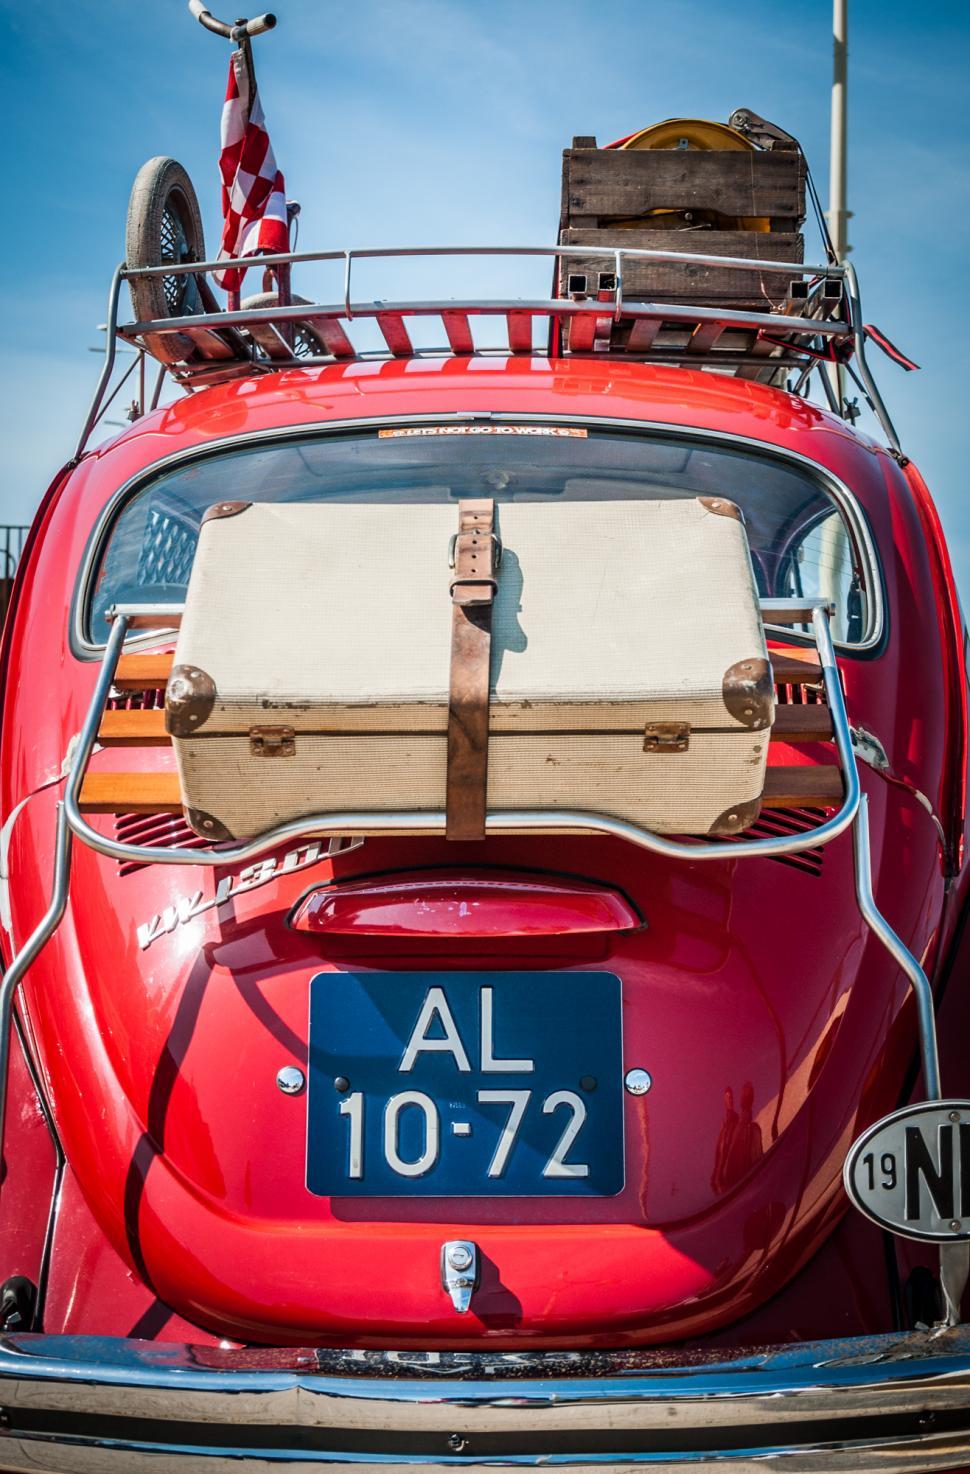 Free Image of Red Car With Luggage on Top 